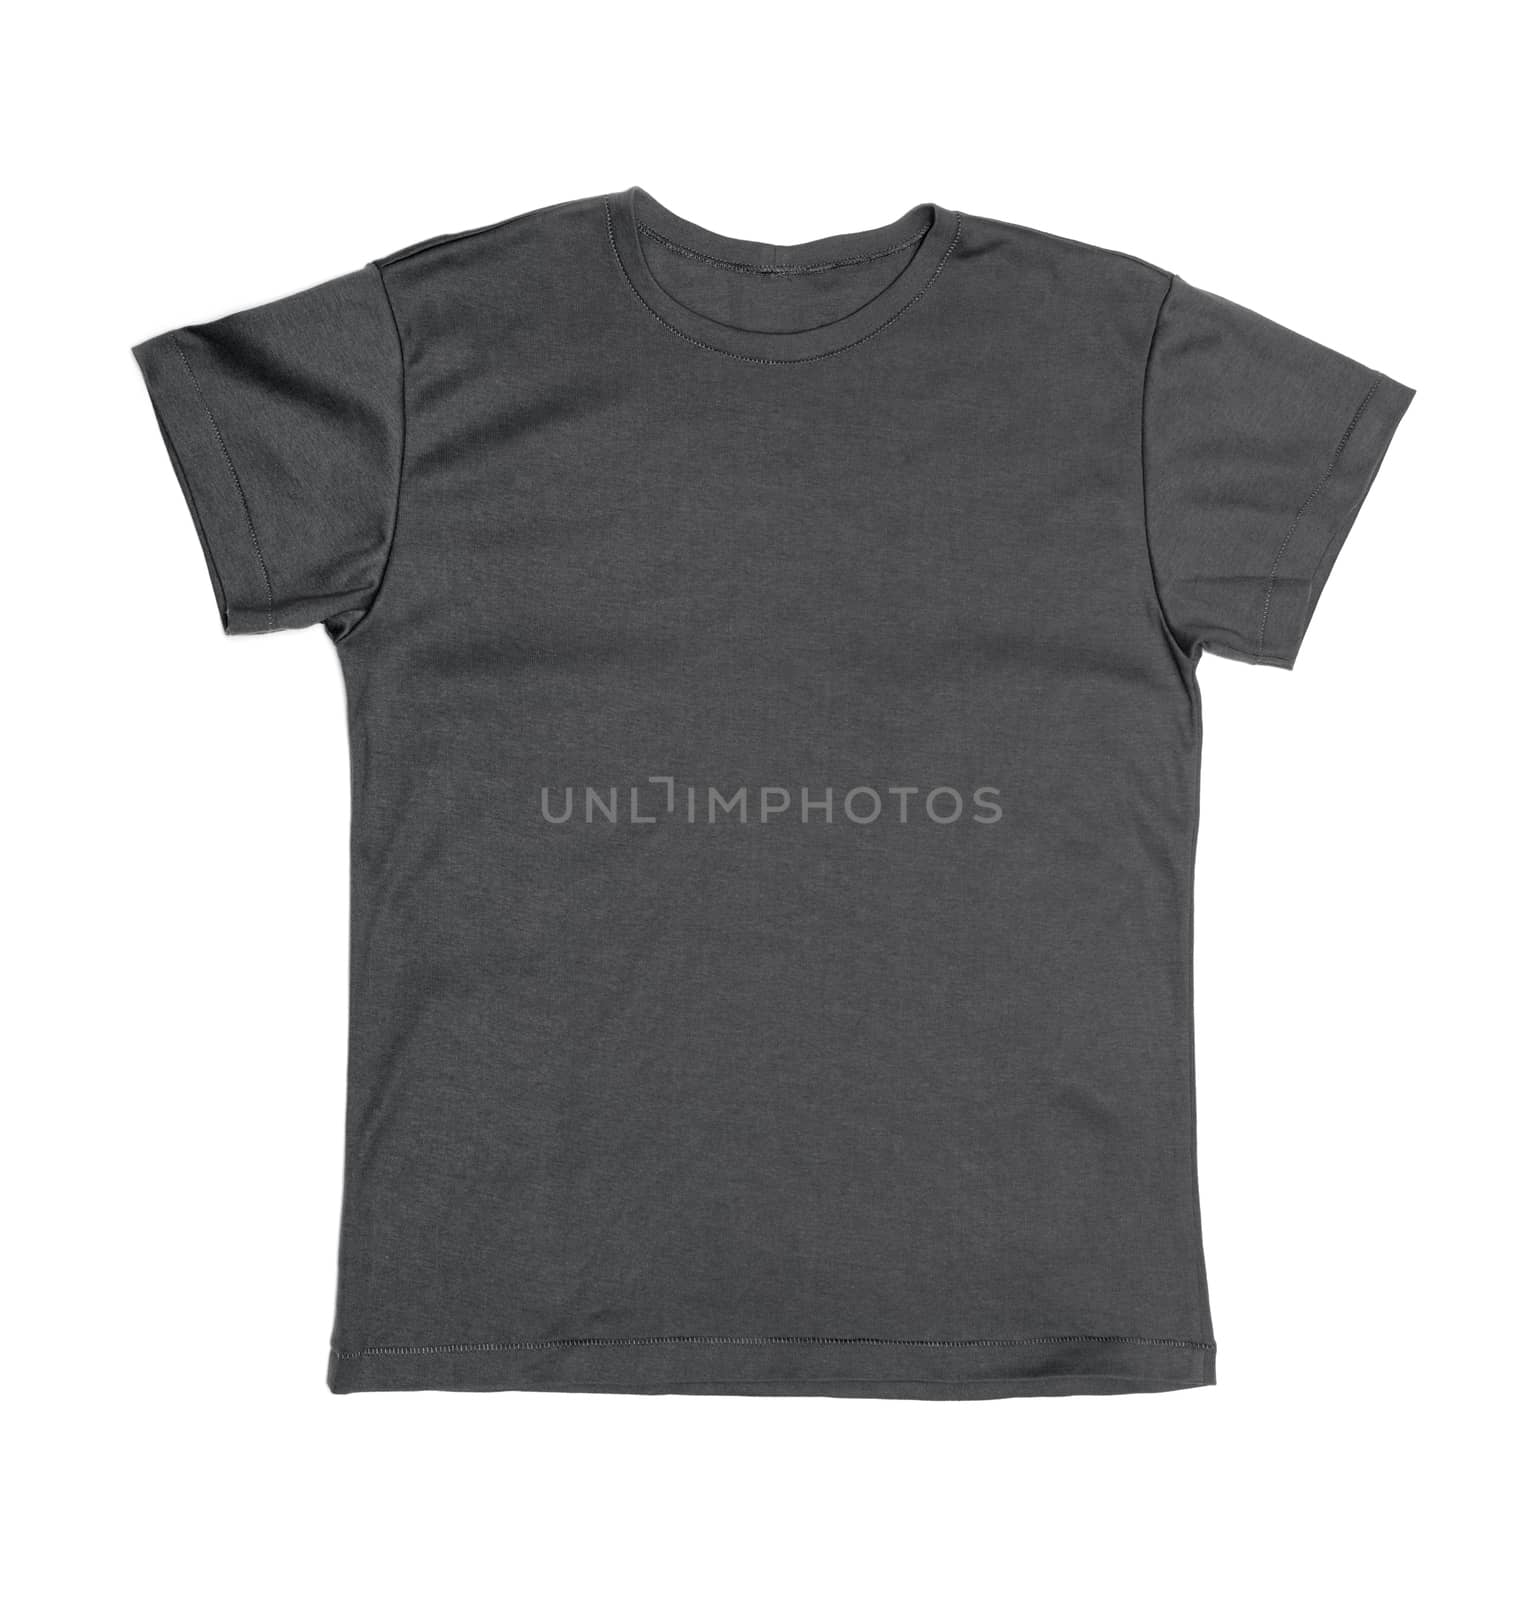 tshirt template ready for your own graphics by DNKSTUDIO